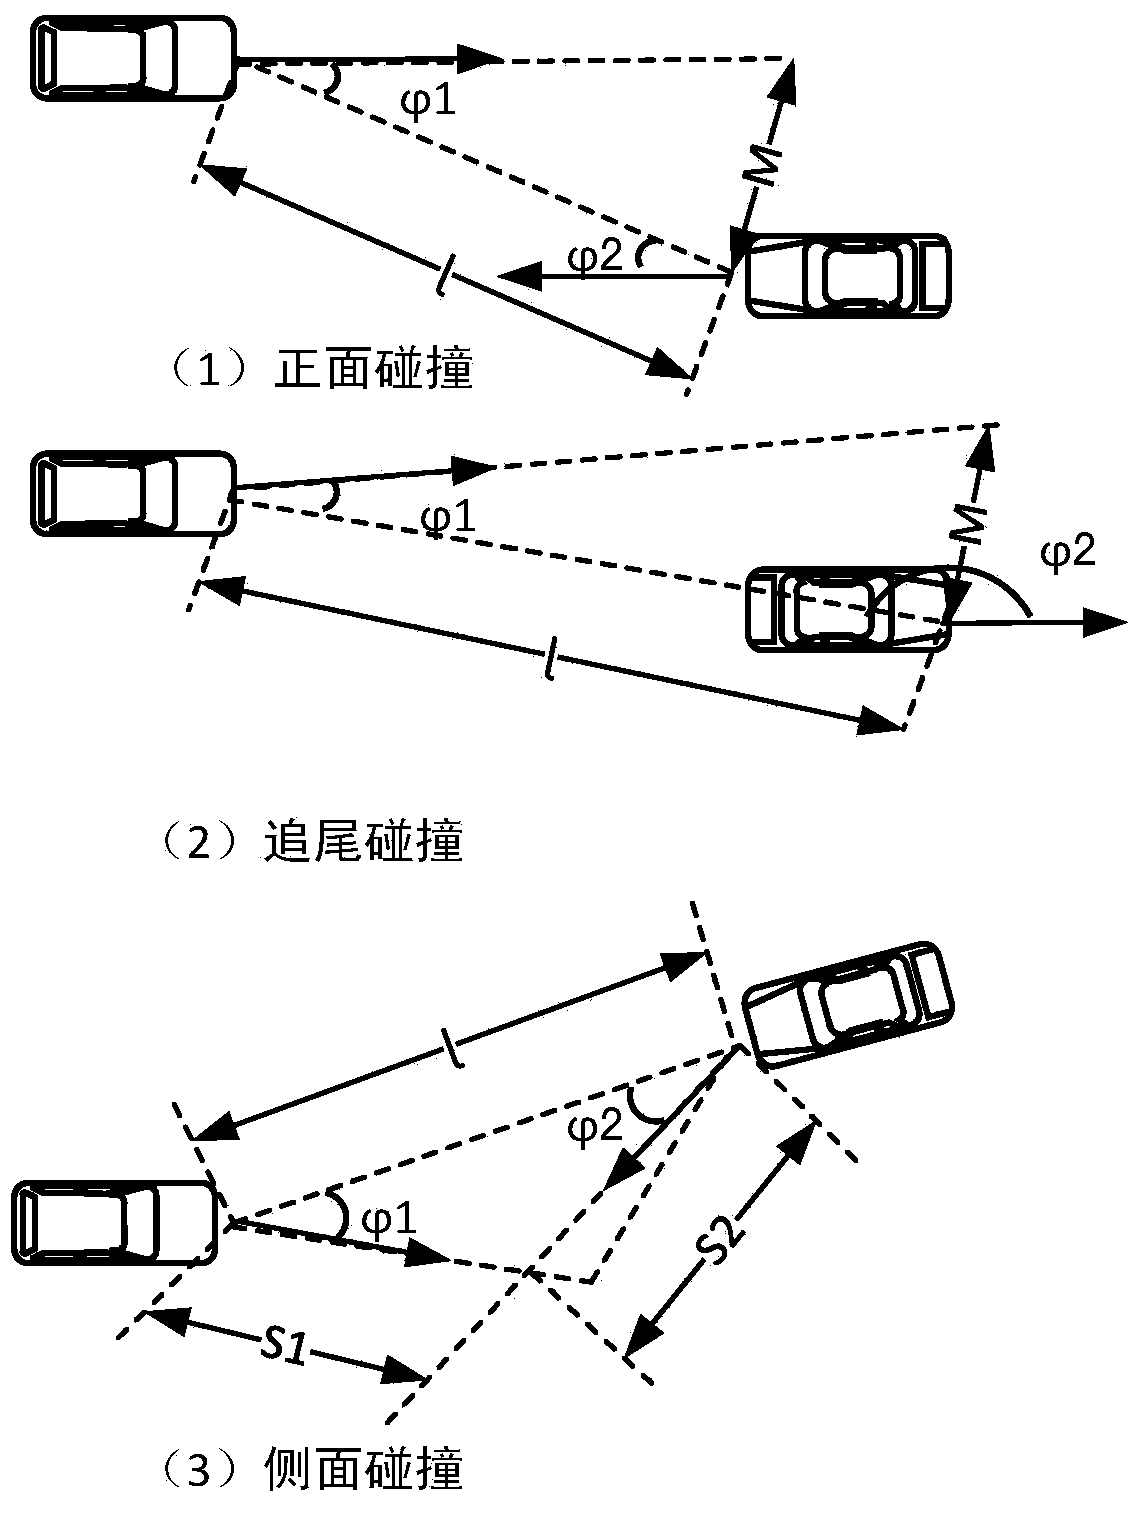 Auxiliary driving system based on collision early-warning algorithm